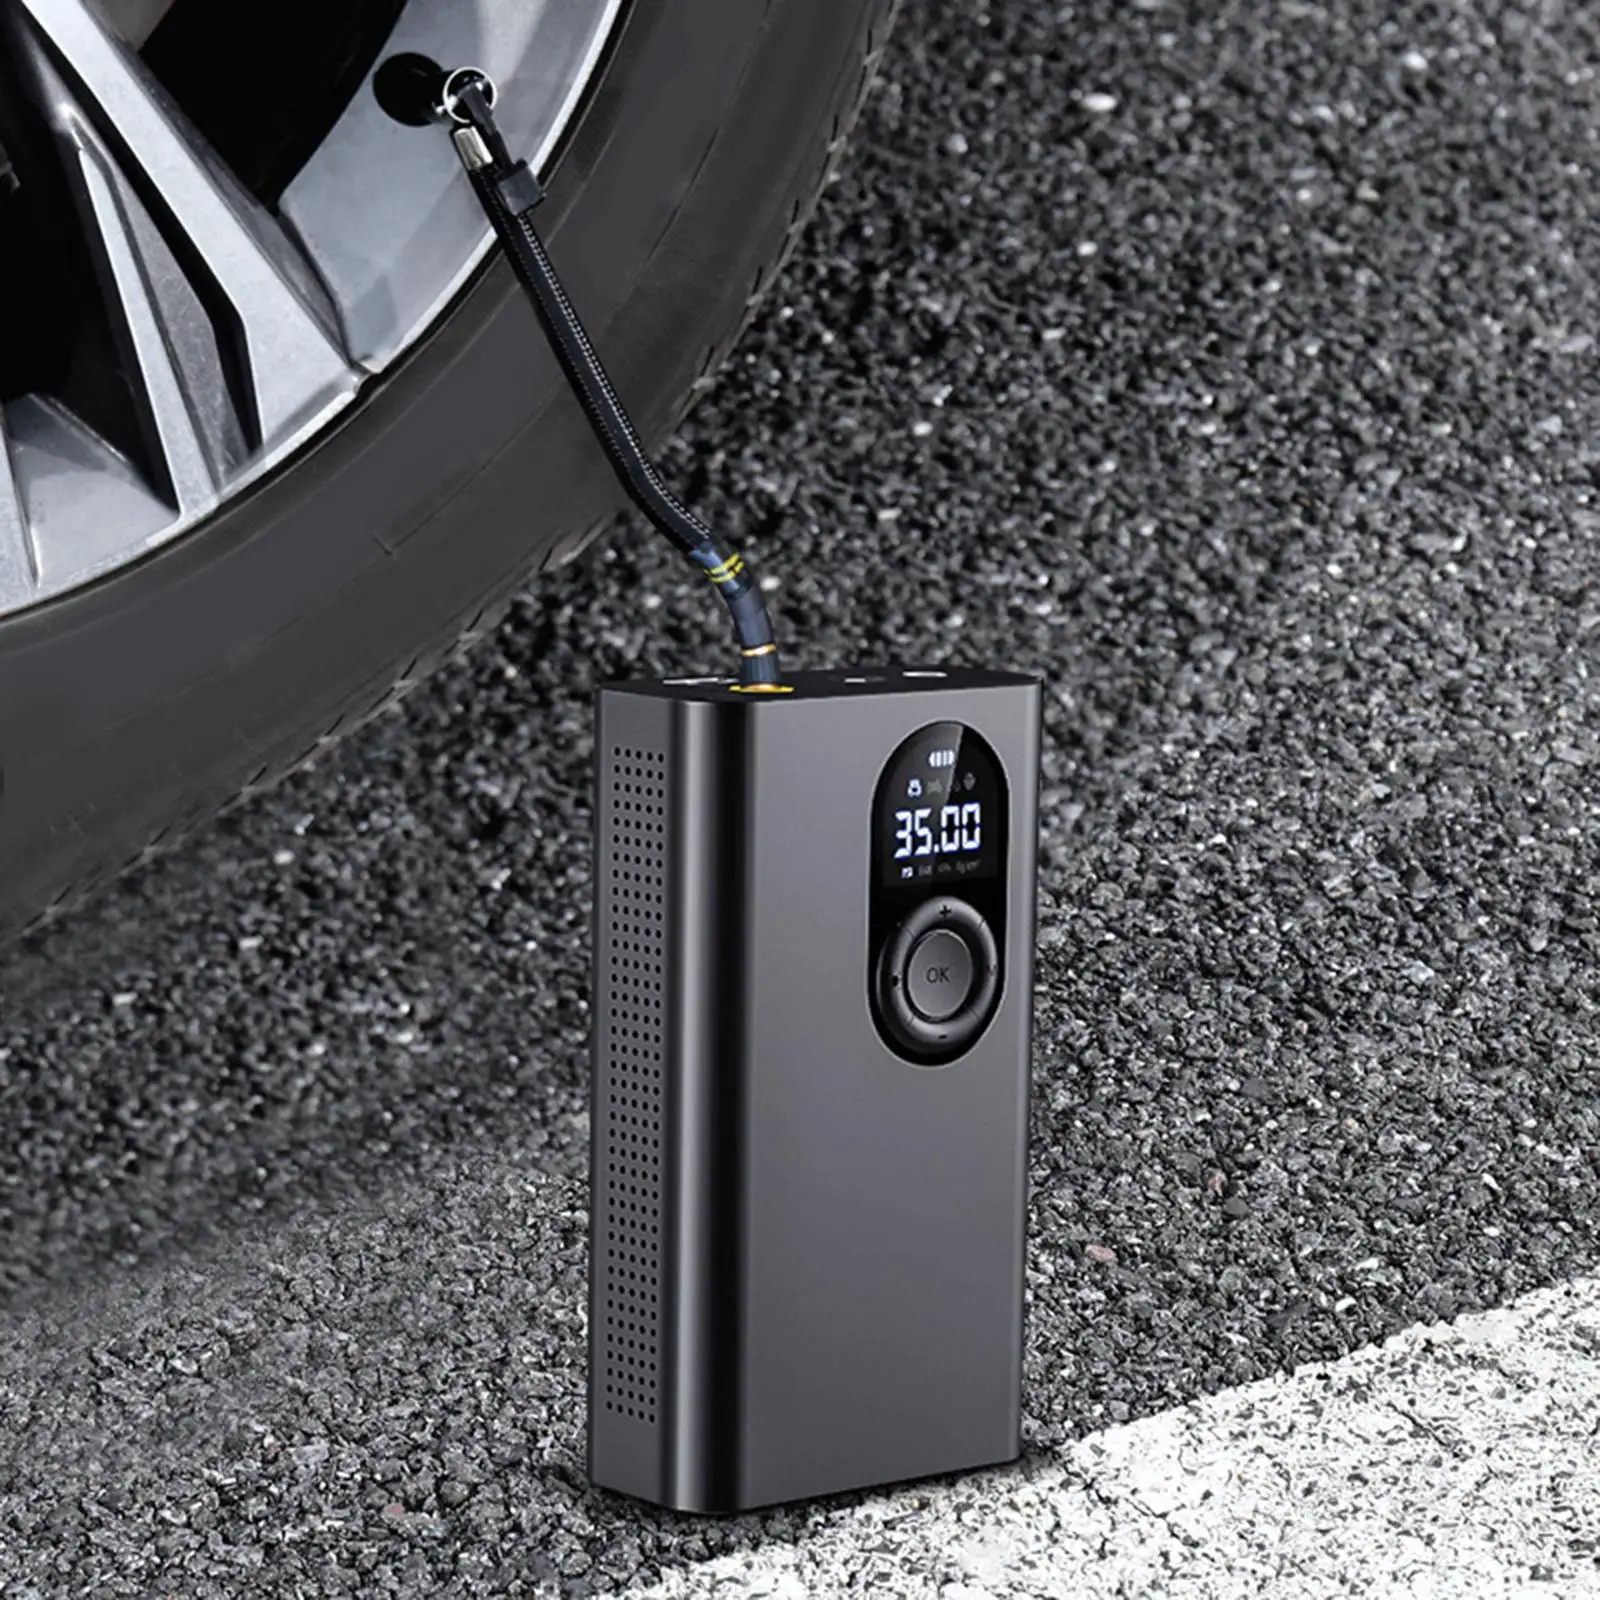 150 PSI Electric Tire Inflator, Digital Display, , LED Lighting ,Mini Rechargeable Portable Car Air  for  Balls